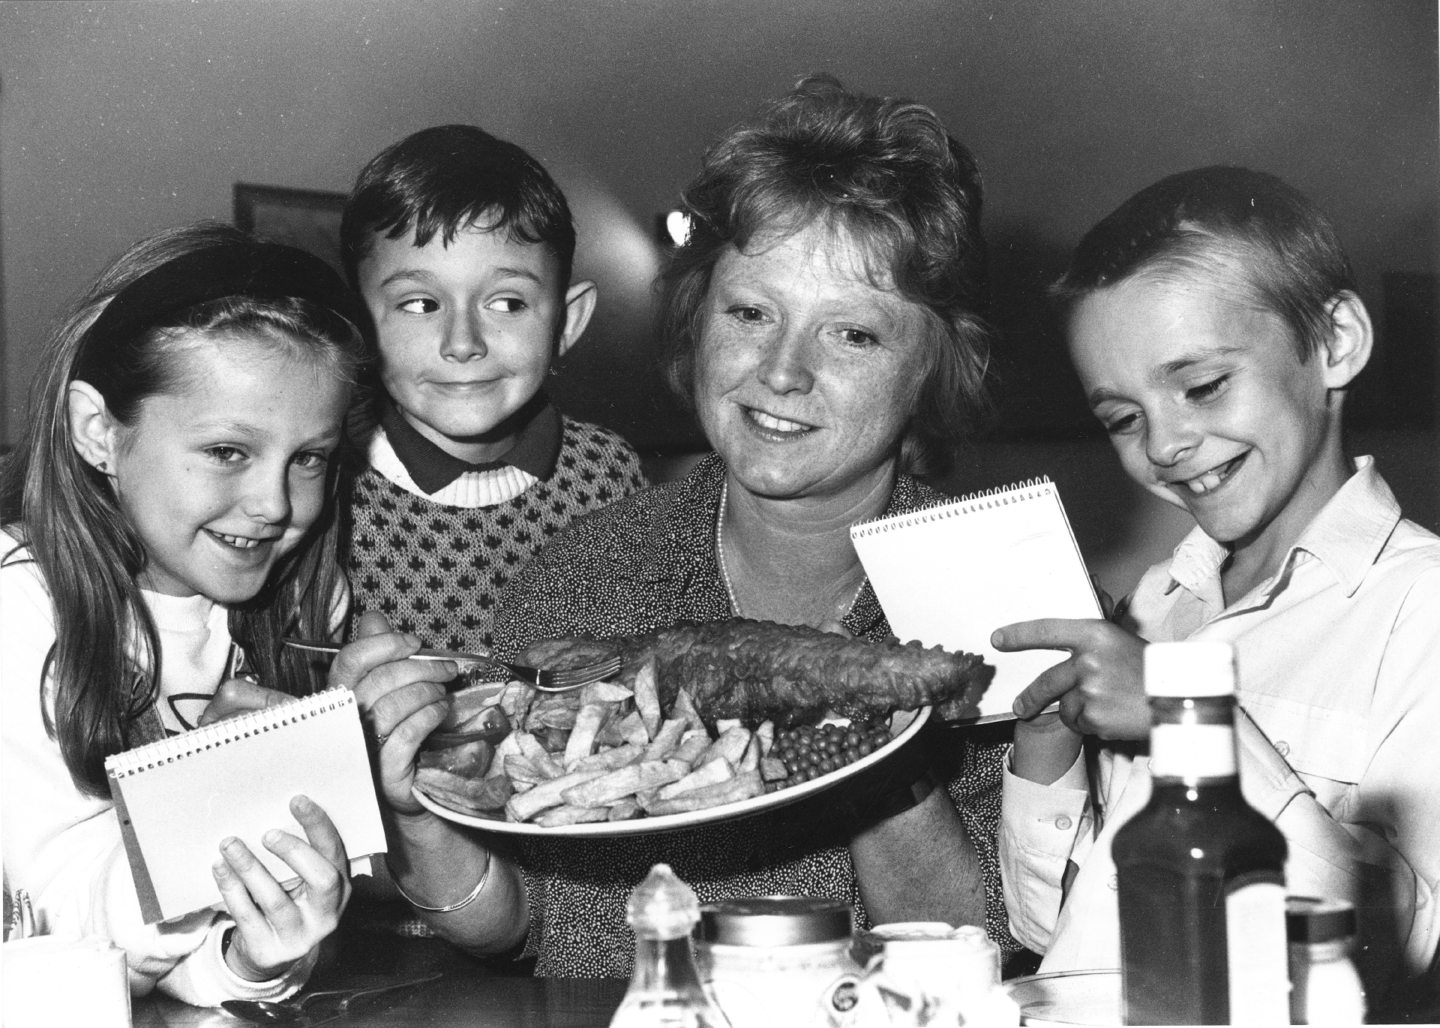 Primary 5 pupils Kerry McDonald, George Webster and Steven Forbes with teacher Jeanette Andrews holding a plate of fish and chips at the Ashvale Restaurant after completing their project on fishing in 1990.